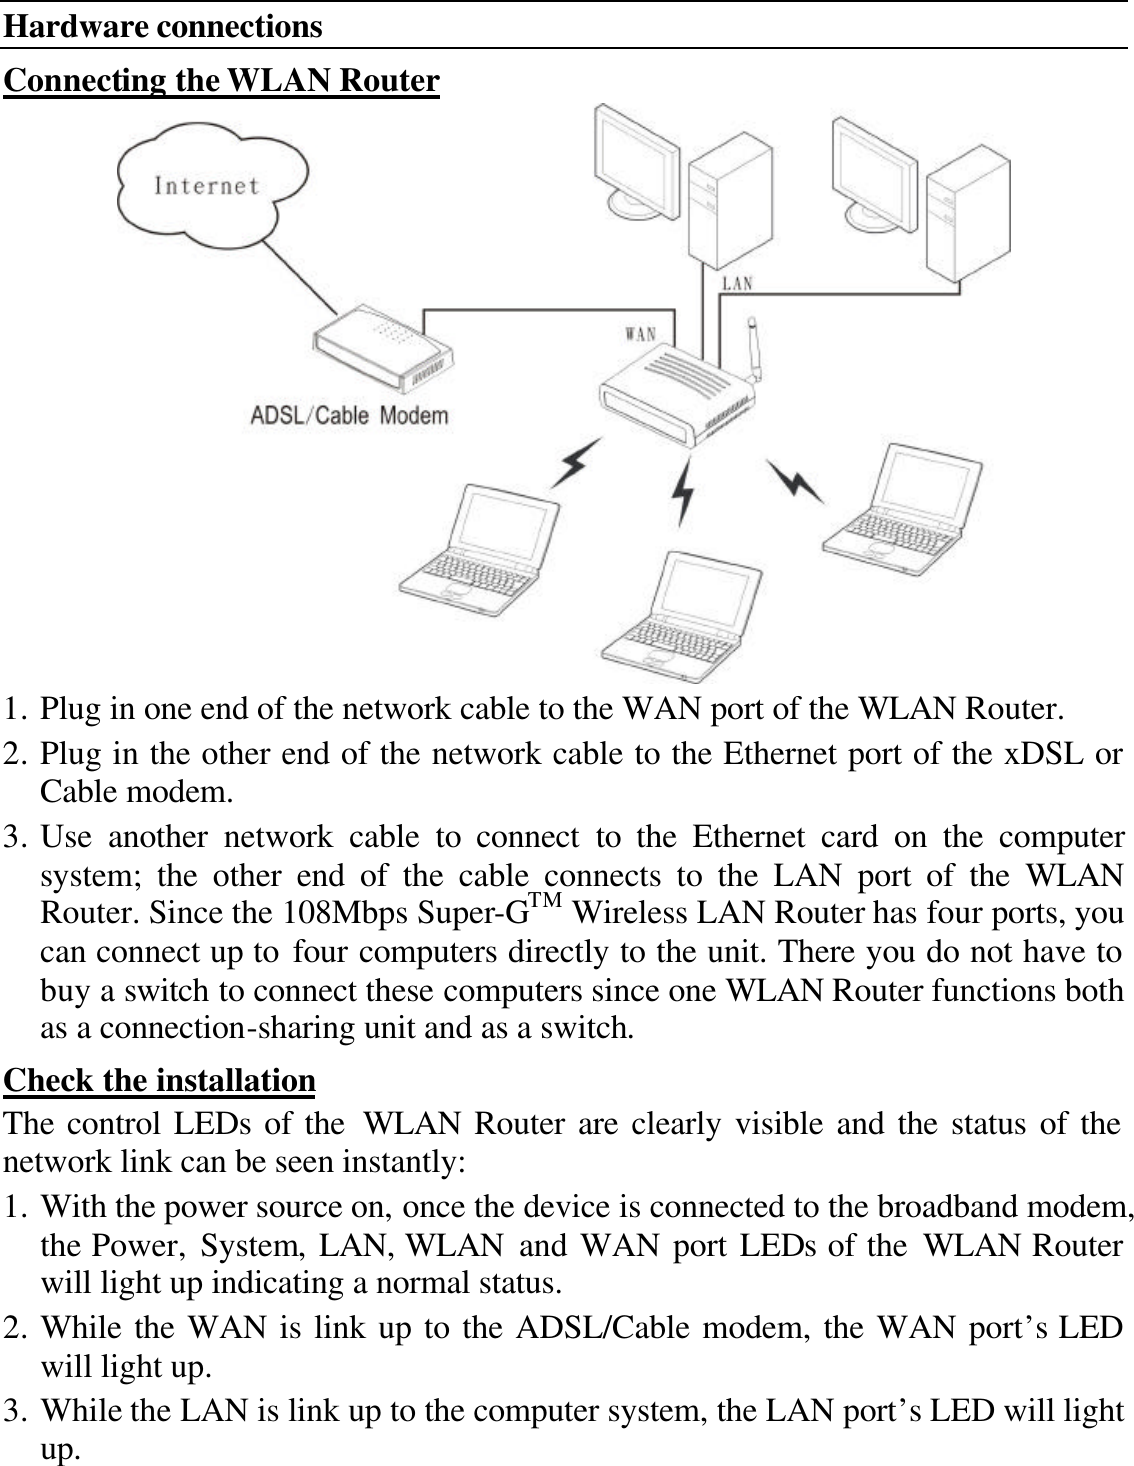 Hardware connections Connecting the WLAN Router  1. Plug in one end of the network cable to the WAN port of the WLAN Router. 2. Plug in the other end of the network cable to the Ethernet port of the xDSL or Cable modem. 3. Use another network cable to connect to the Ethernet card on the computer system; the other end of the cable connects to the LAN port of the WLAN Router. Since the 108Mbps Super-GTM Wireless LAN Router has four ports, you can connect up to four computers directly to the unit. There you do not have to buy a switch to connect these computers since one WLAN Router functions both as a connection-sharing unit and as a switch. Check the installation The control LEDs of the WLAN Router are clearly visible and the status of the network link can be seen instantly: 1. With the power source on, once the device is connected to the broadband modem, the Power, System, LAN, WLAN and WAN port LEDs of the WLAN Router will light up indicating a normal status. 2. While the WAN is link up to the ADSL/Cable modem, the WAN port’s LED will light up. 3. While the LAN is link up to the computer system, the LAN port’s LED will light up.  